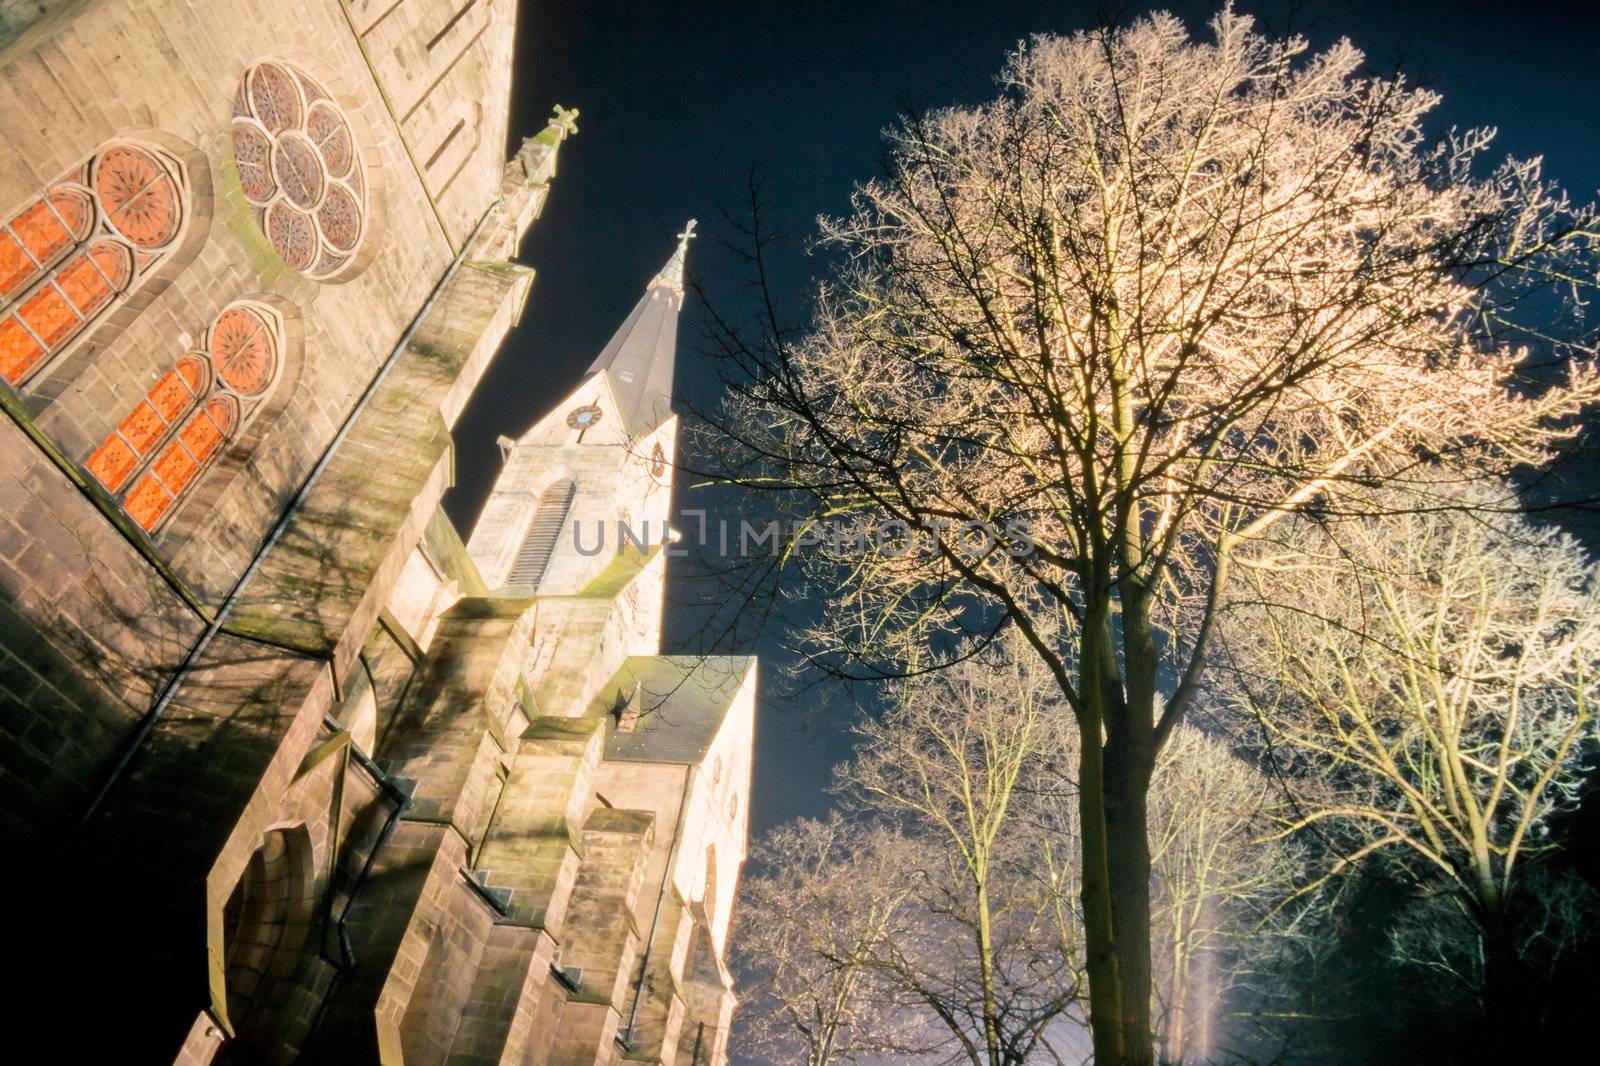 Large stone church at night by PiLens